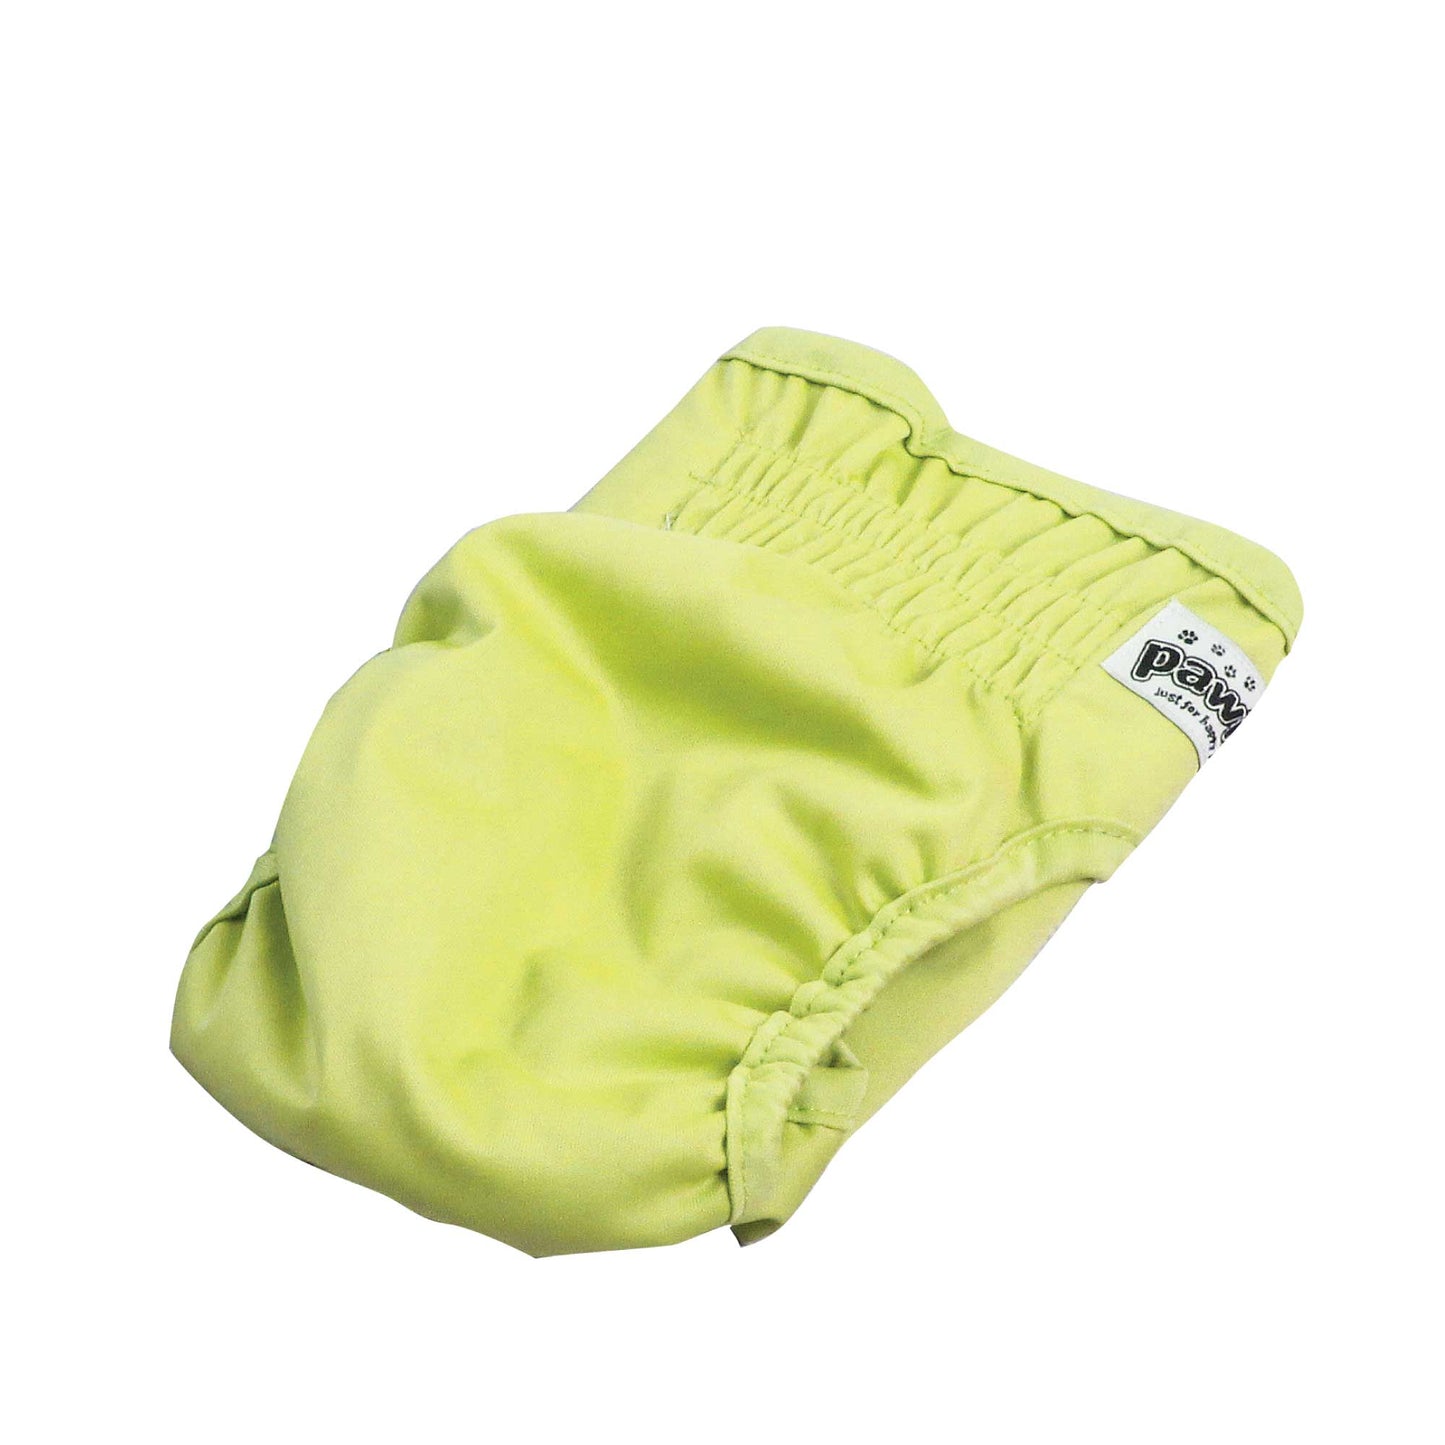 3 Pck Reusable Female Dog Diapers Puppy Nappy Eco Washable Period Incontinence Heat-2